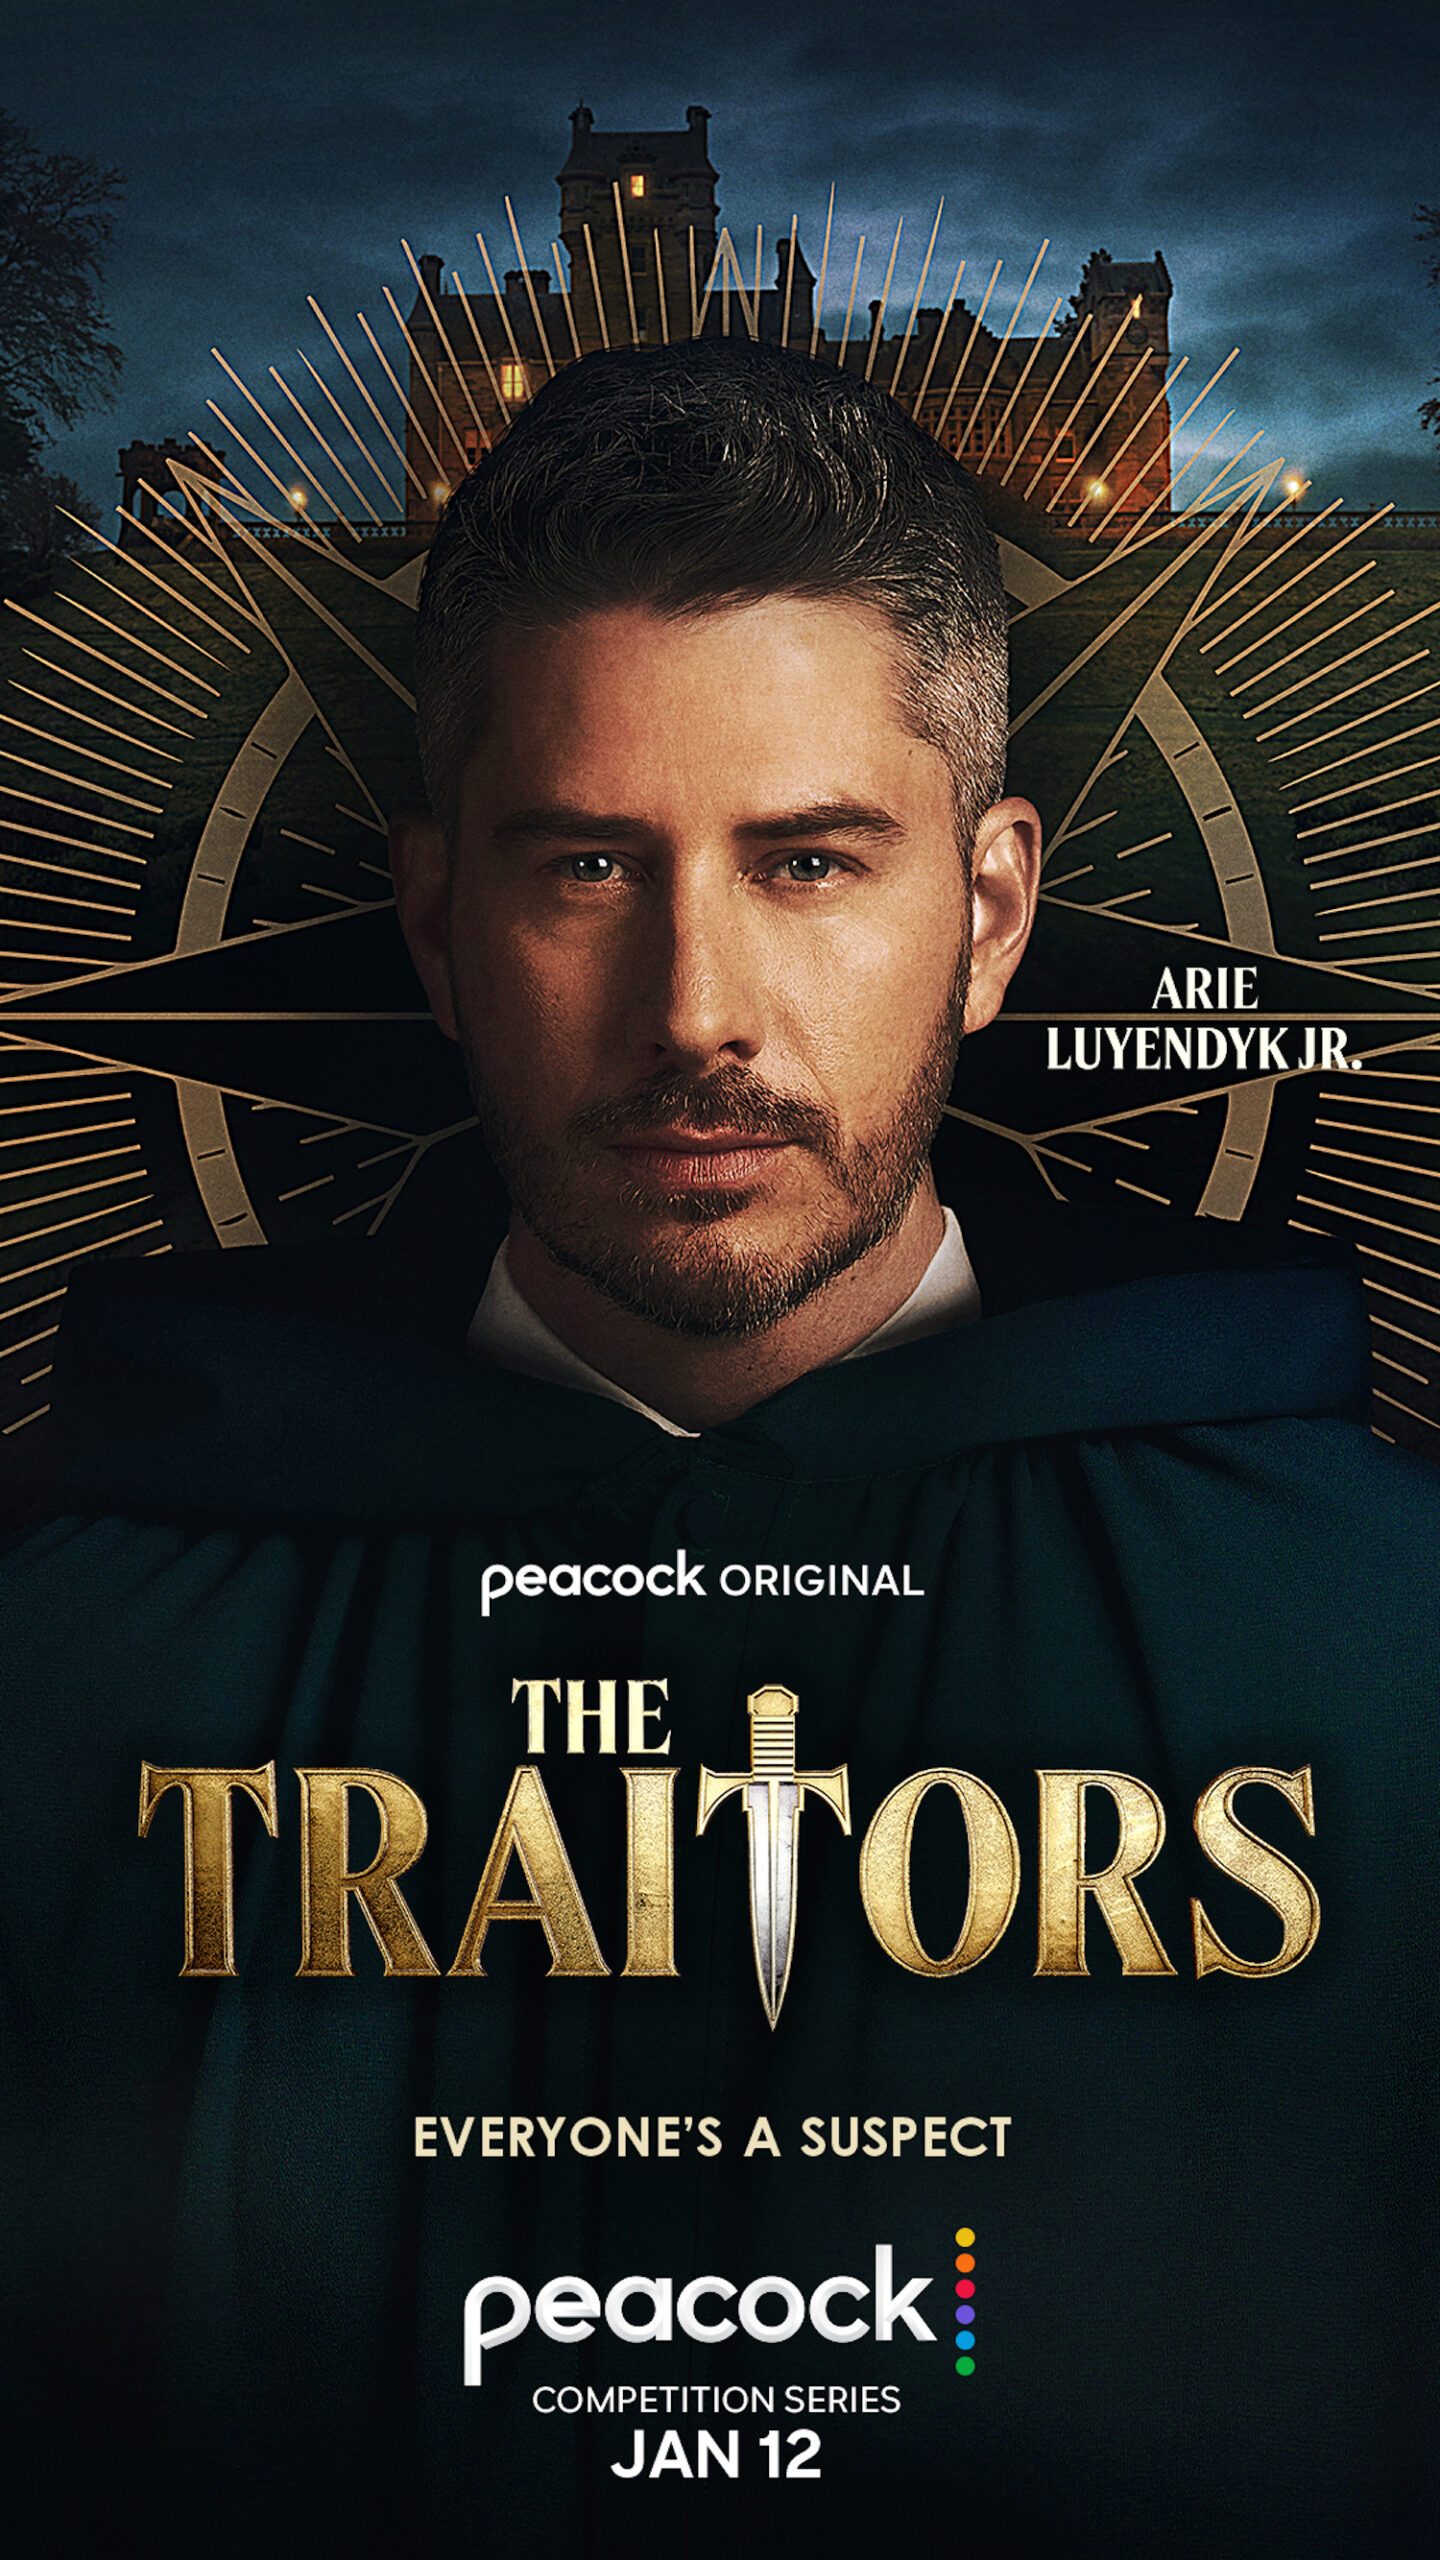 Arie Luyendyk Jr. for 'The Traitors'